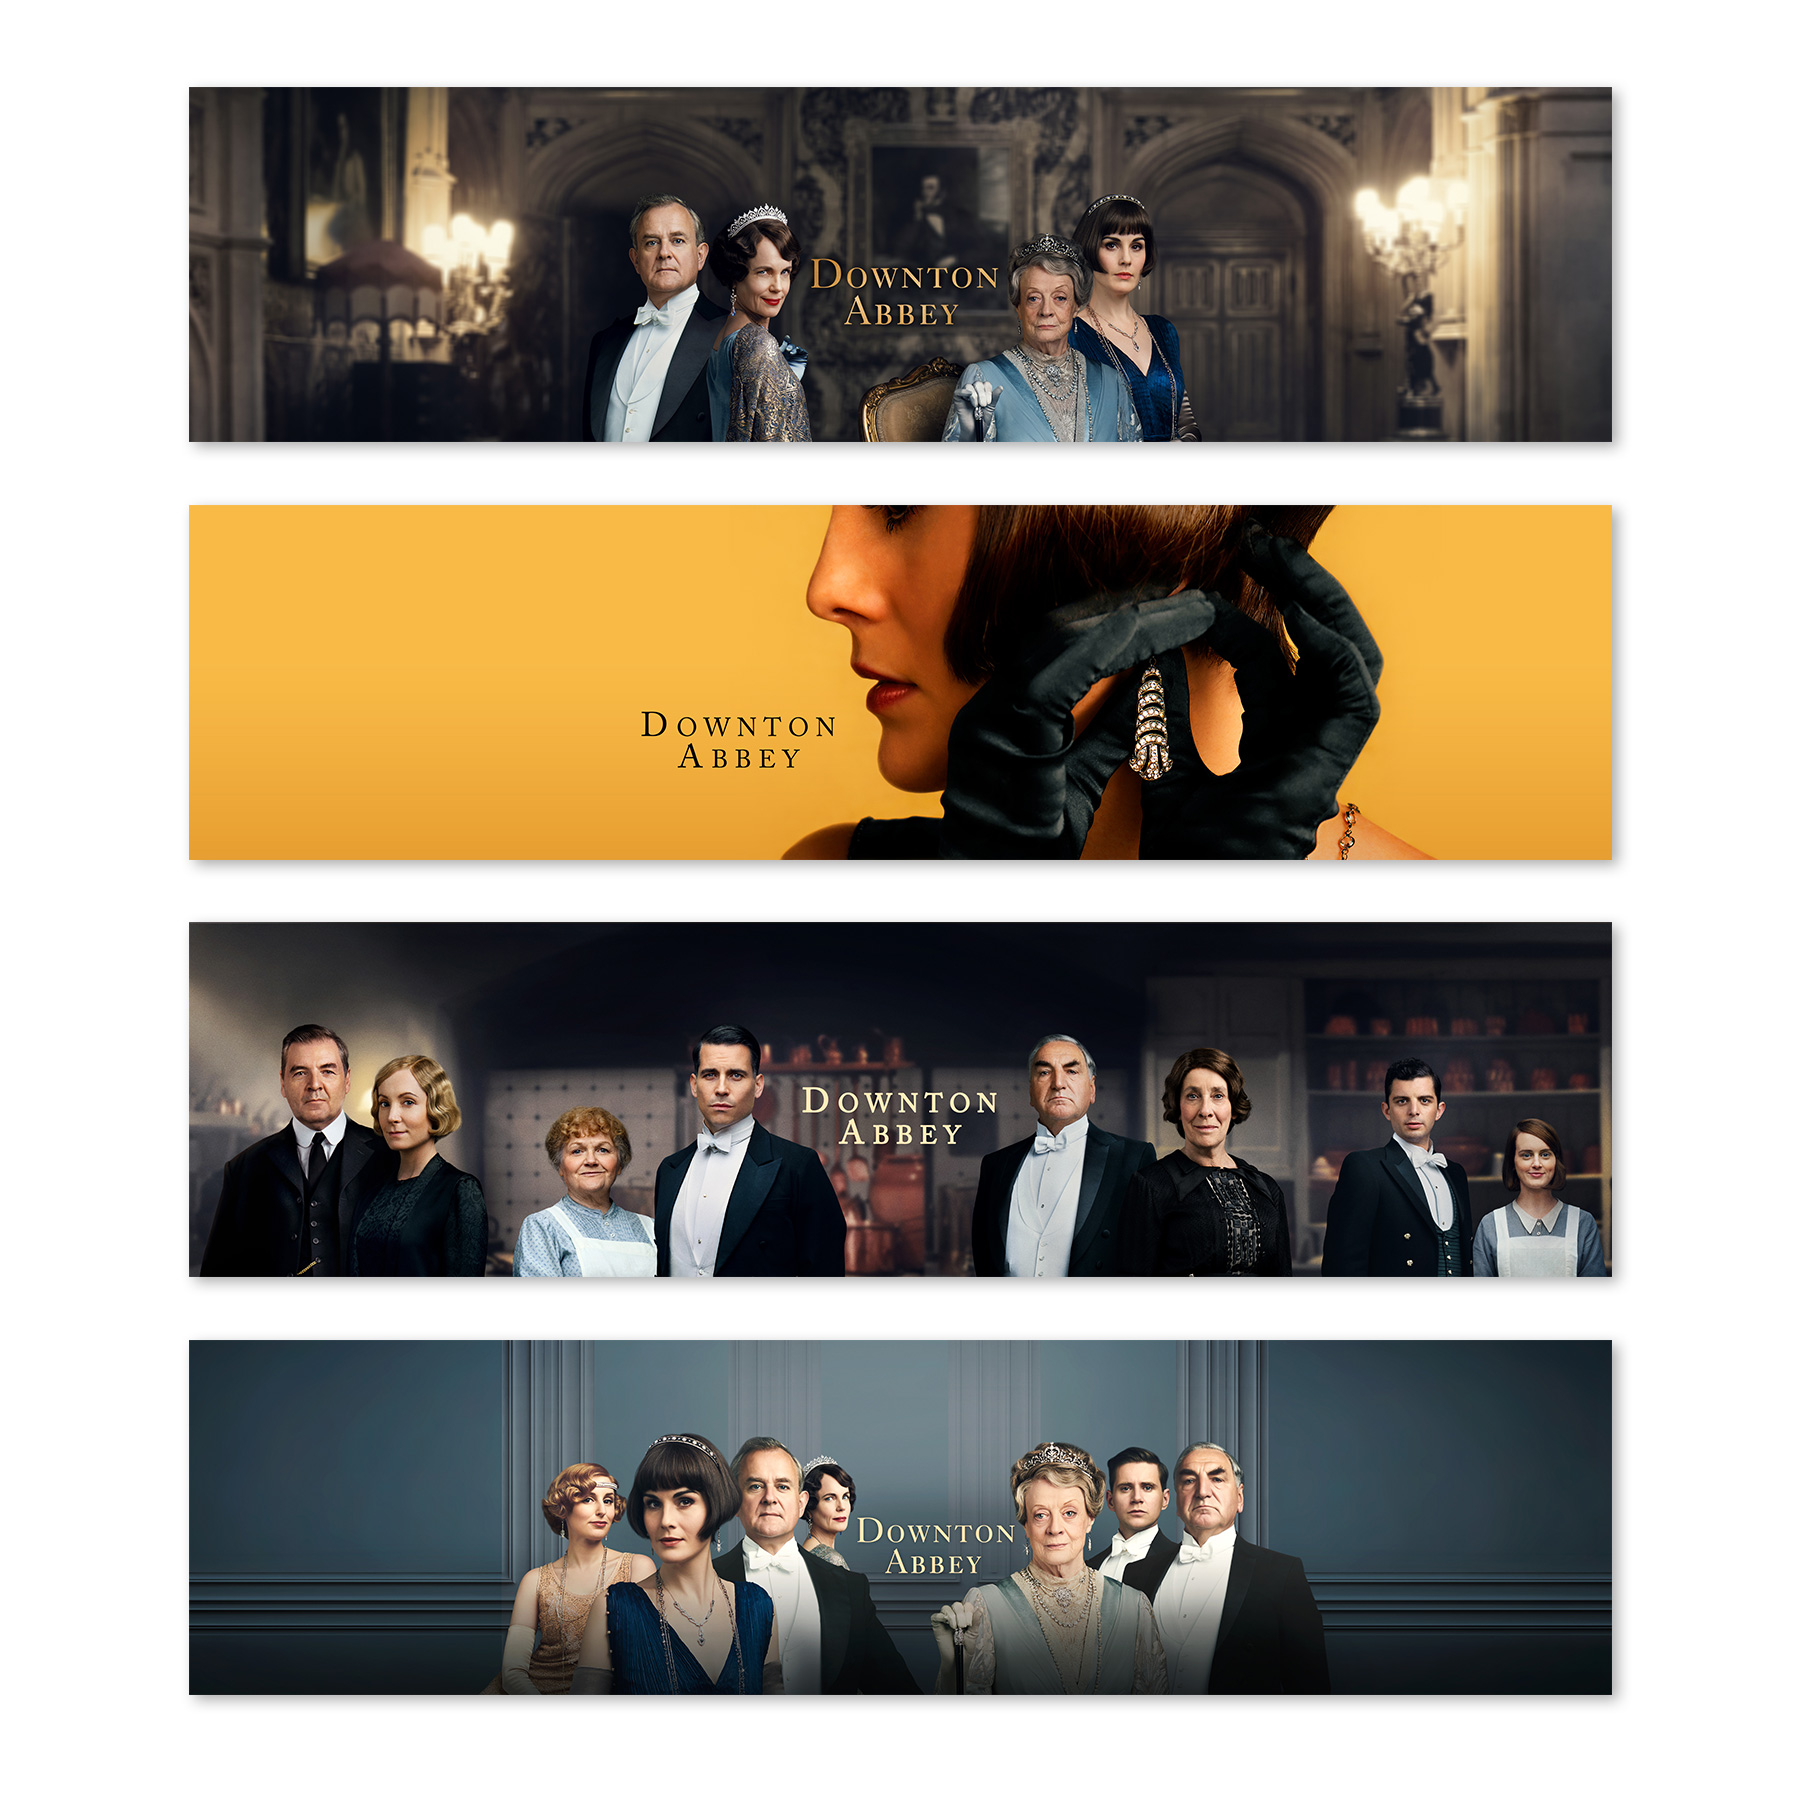 Downton Abbey iTunes Ads